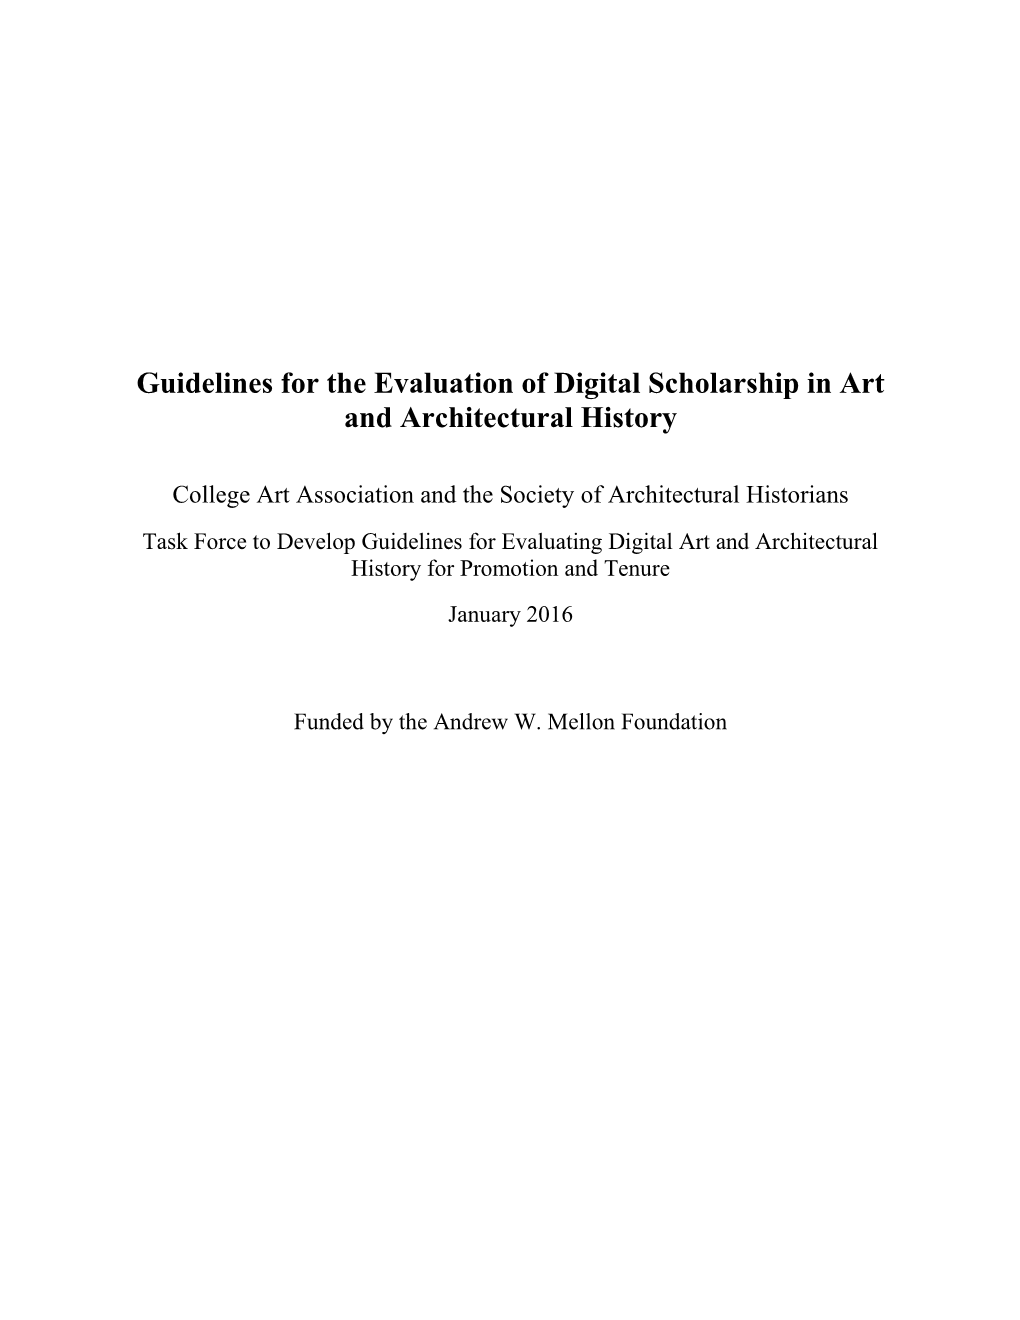 Guidelines for the Evaluation of Digital Scholarship in Art and Architectural History